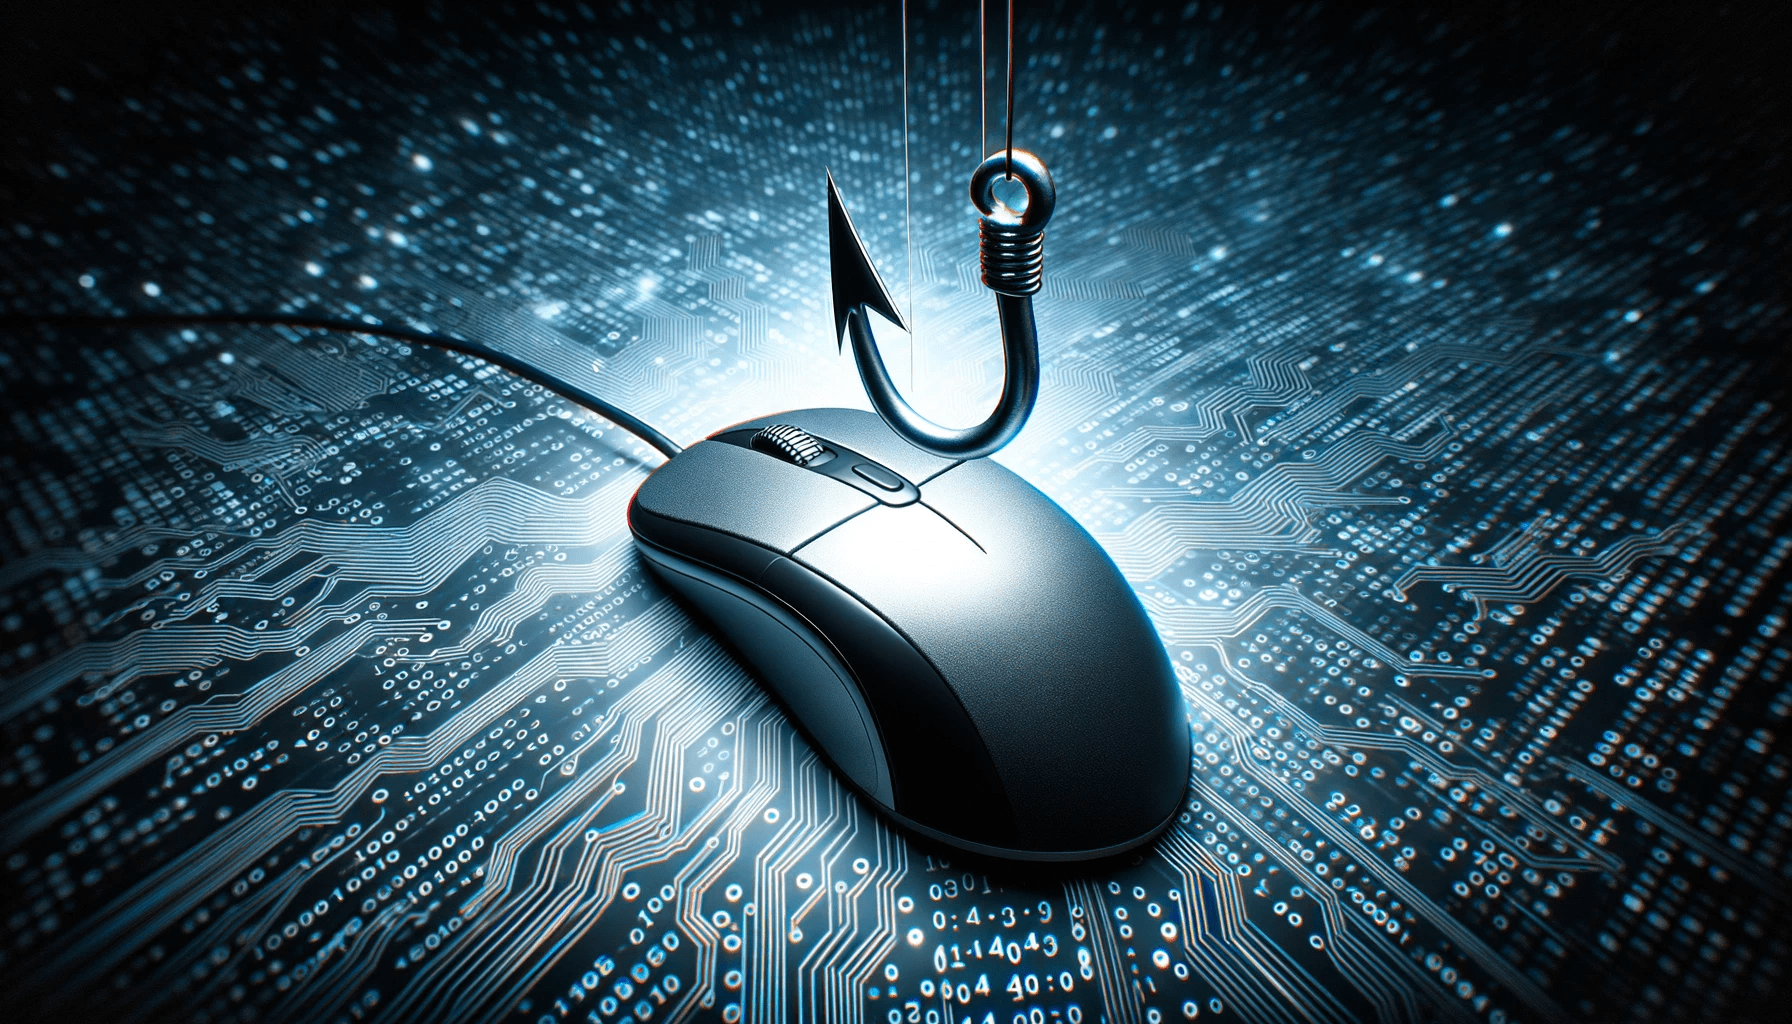 Photo of a computer mouse nearing a sharp fishing hook